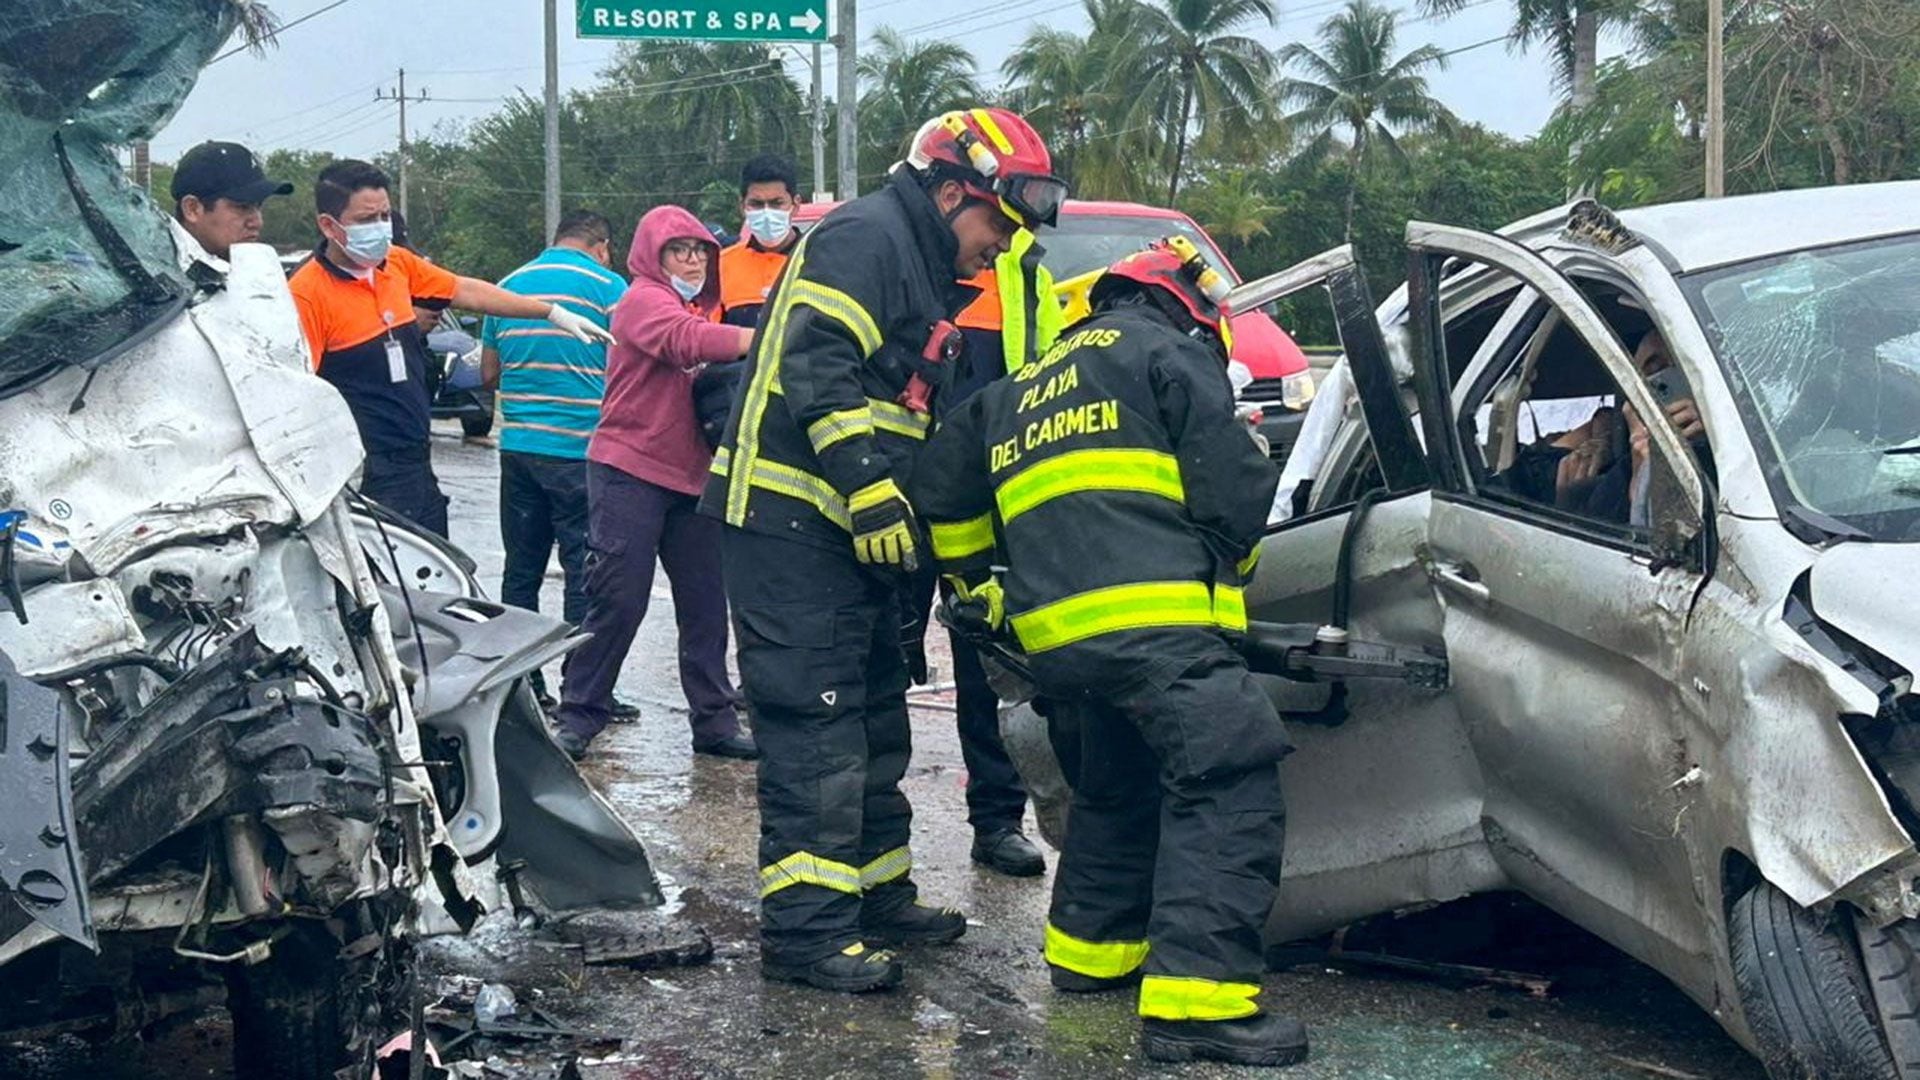 Playa del Carmen firefighters work at the accident site where a truck and a van collided on the Playa del Carmen-Tulum highway